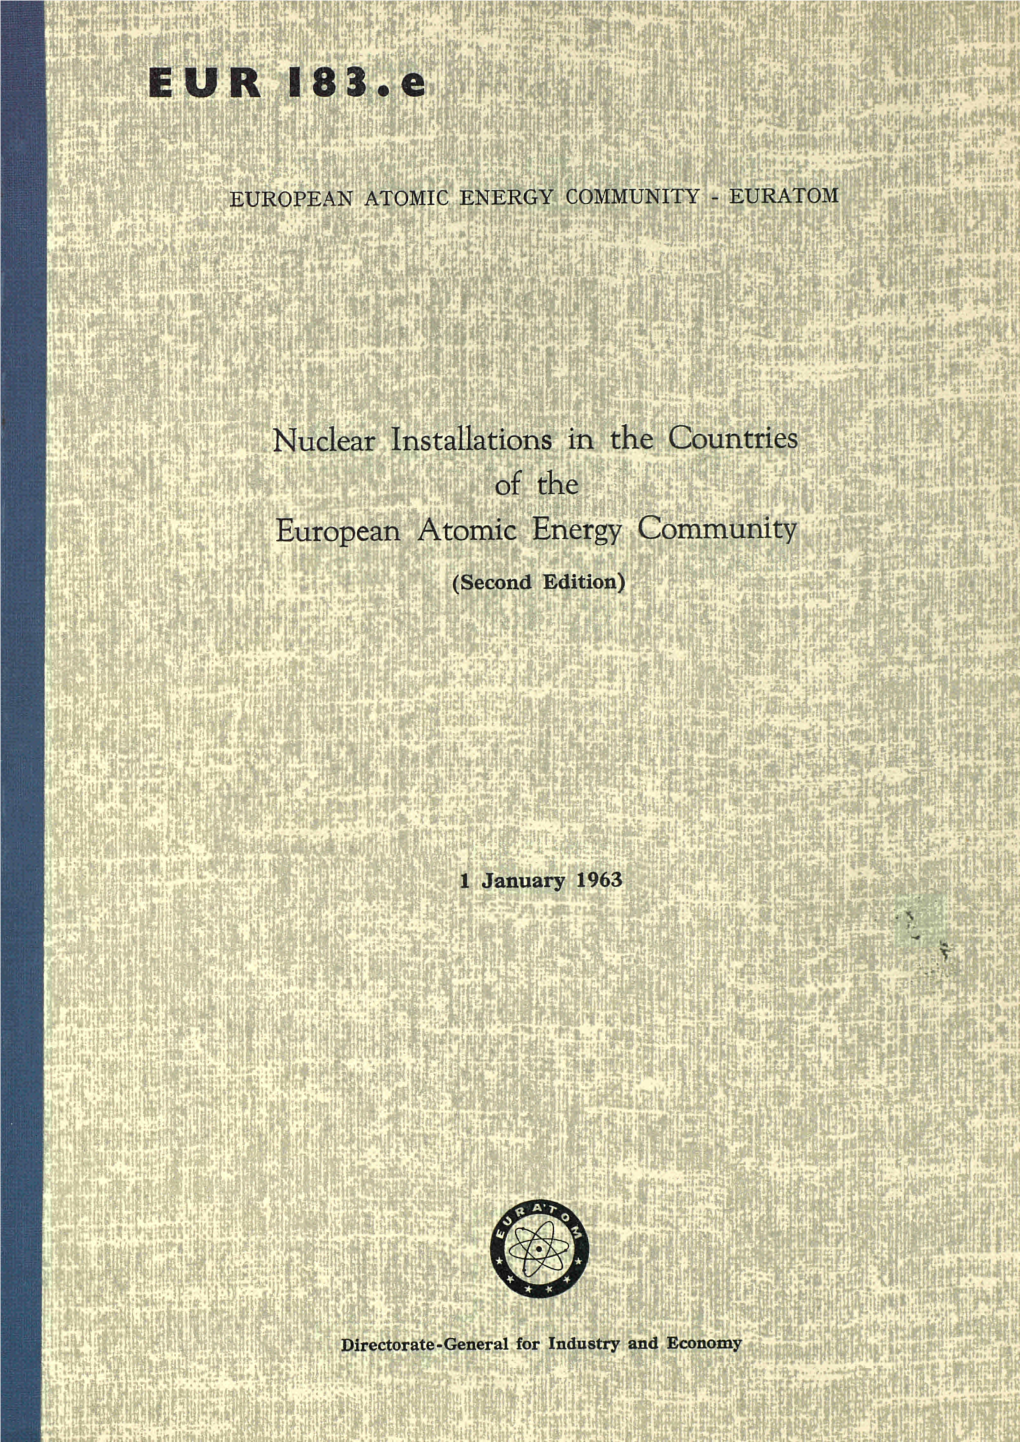 NUCLEAR INSTALLATIONS in the COUNTRIES of the EUROPEAN ATOMIC ENERGY COMMUNITY (Second Edition)